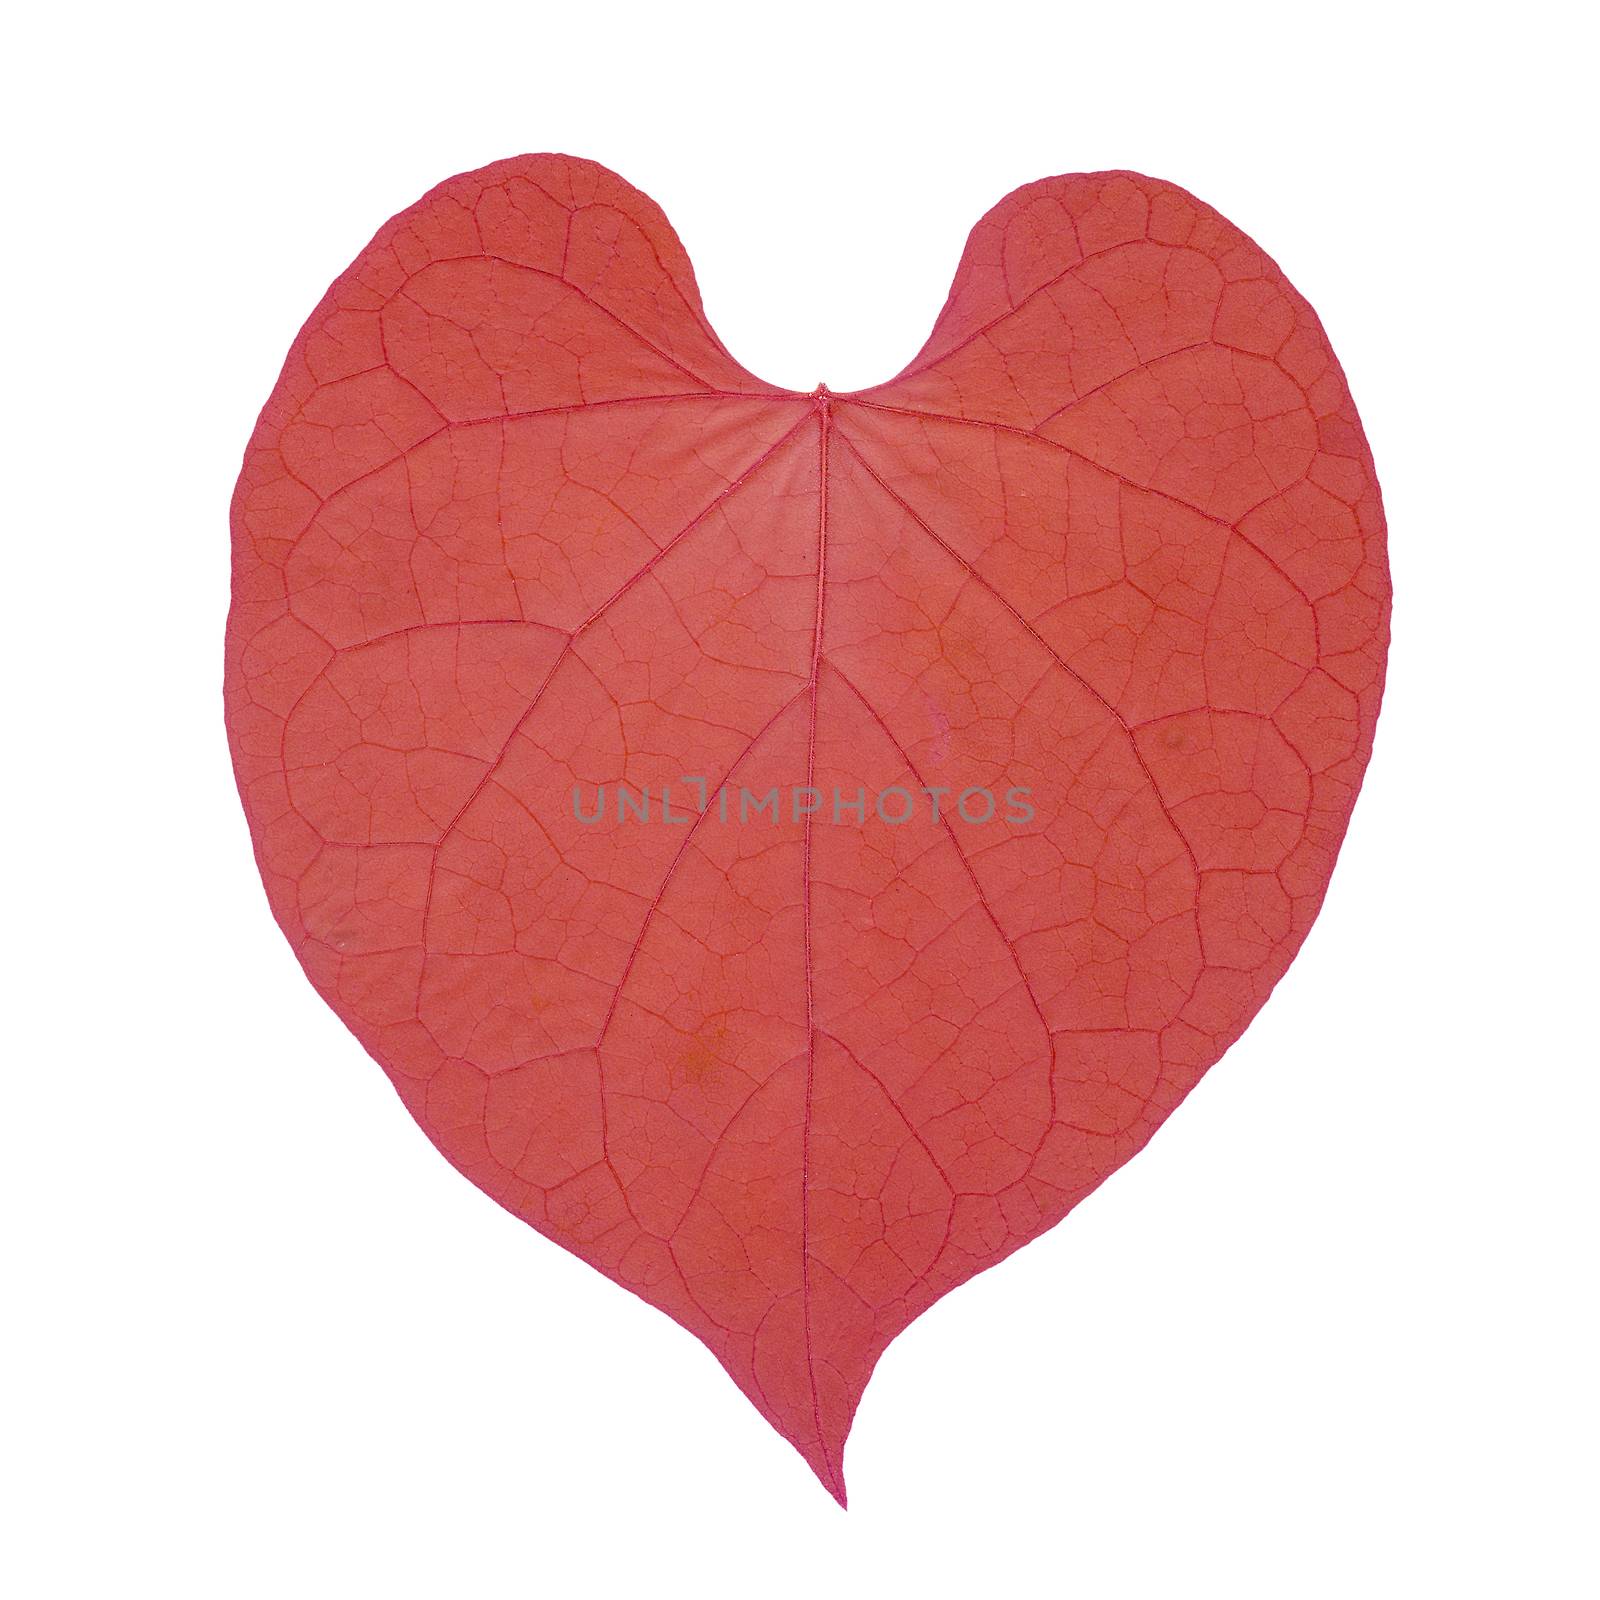 Pink dry leaf in shape heart isolated on white background